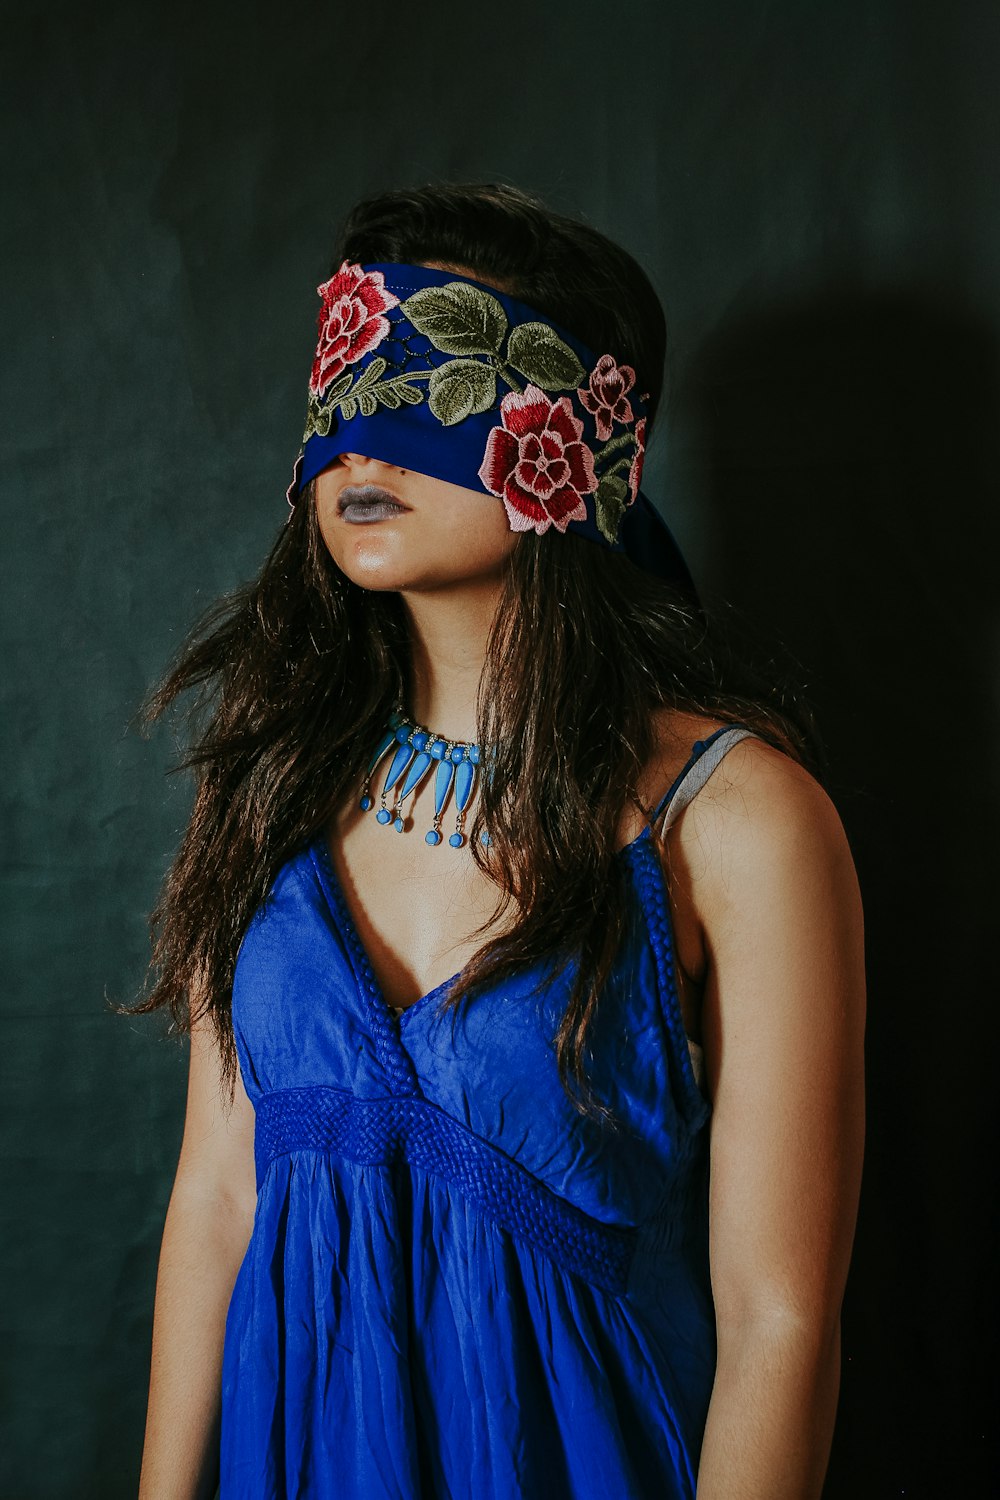 woman in blue sleeveless top wearing black and red floral headdress